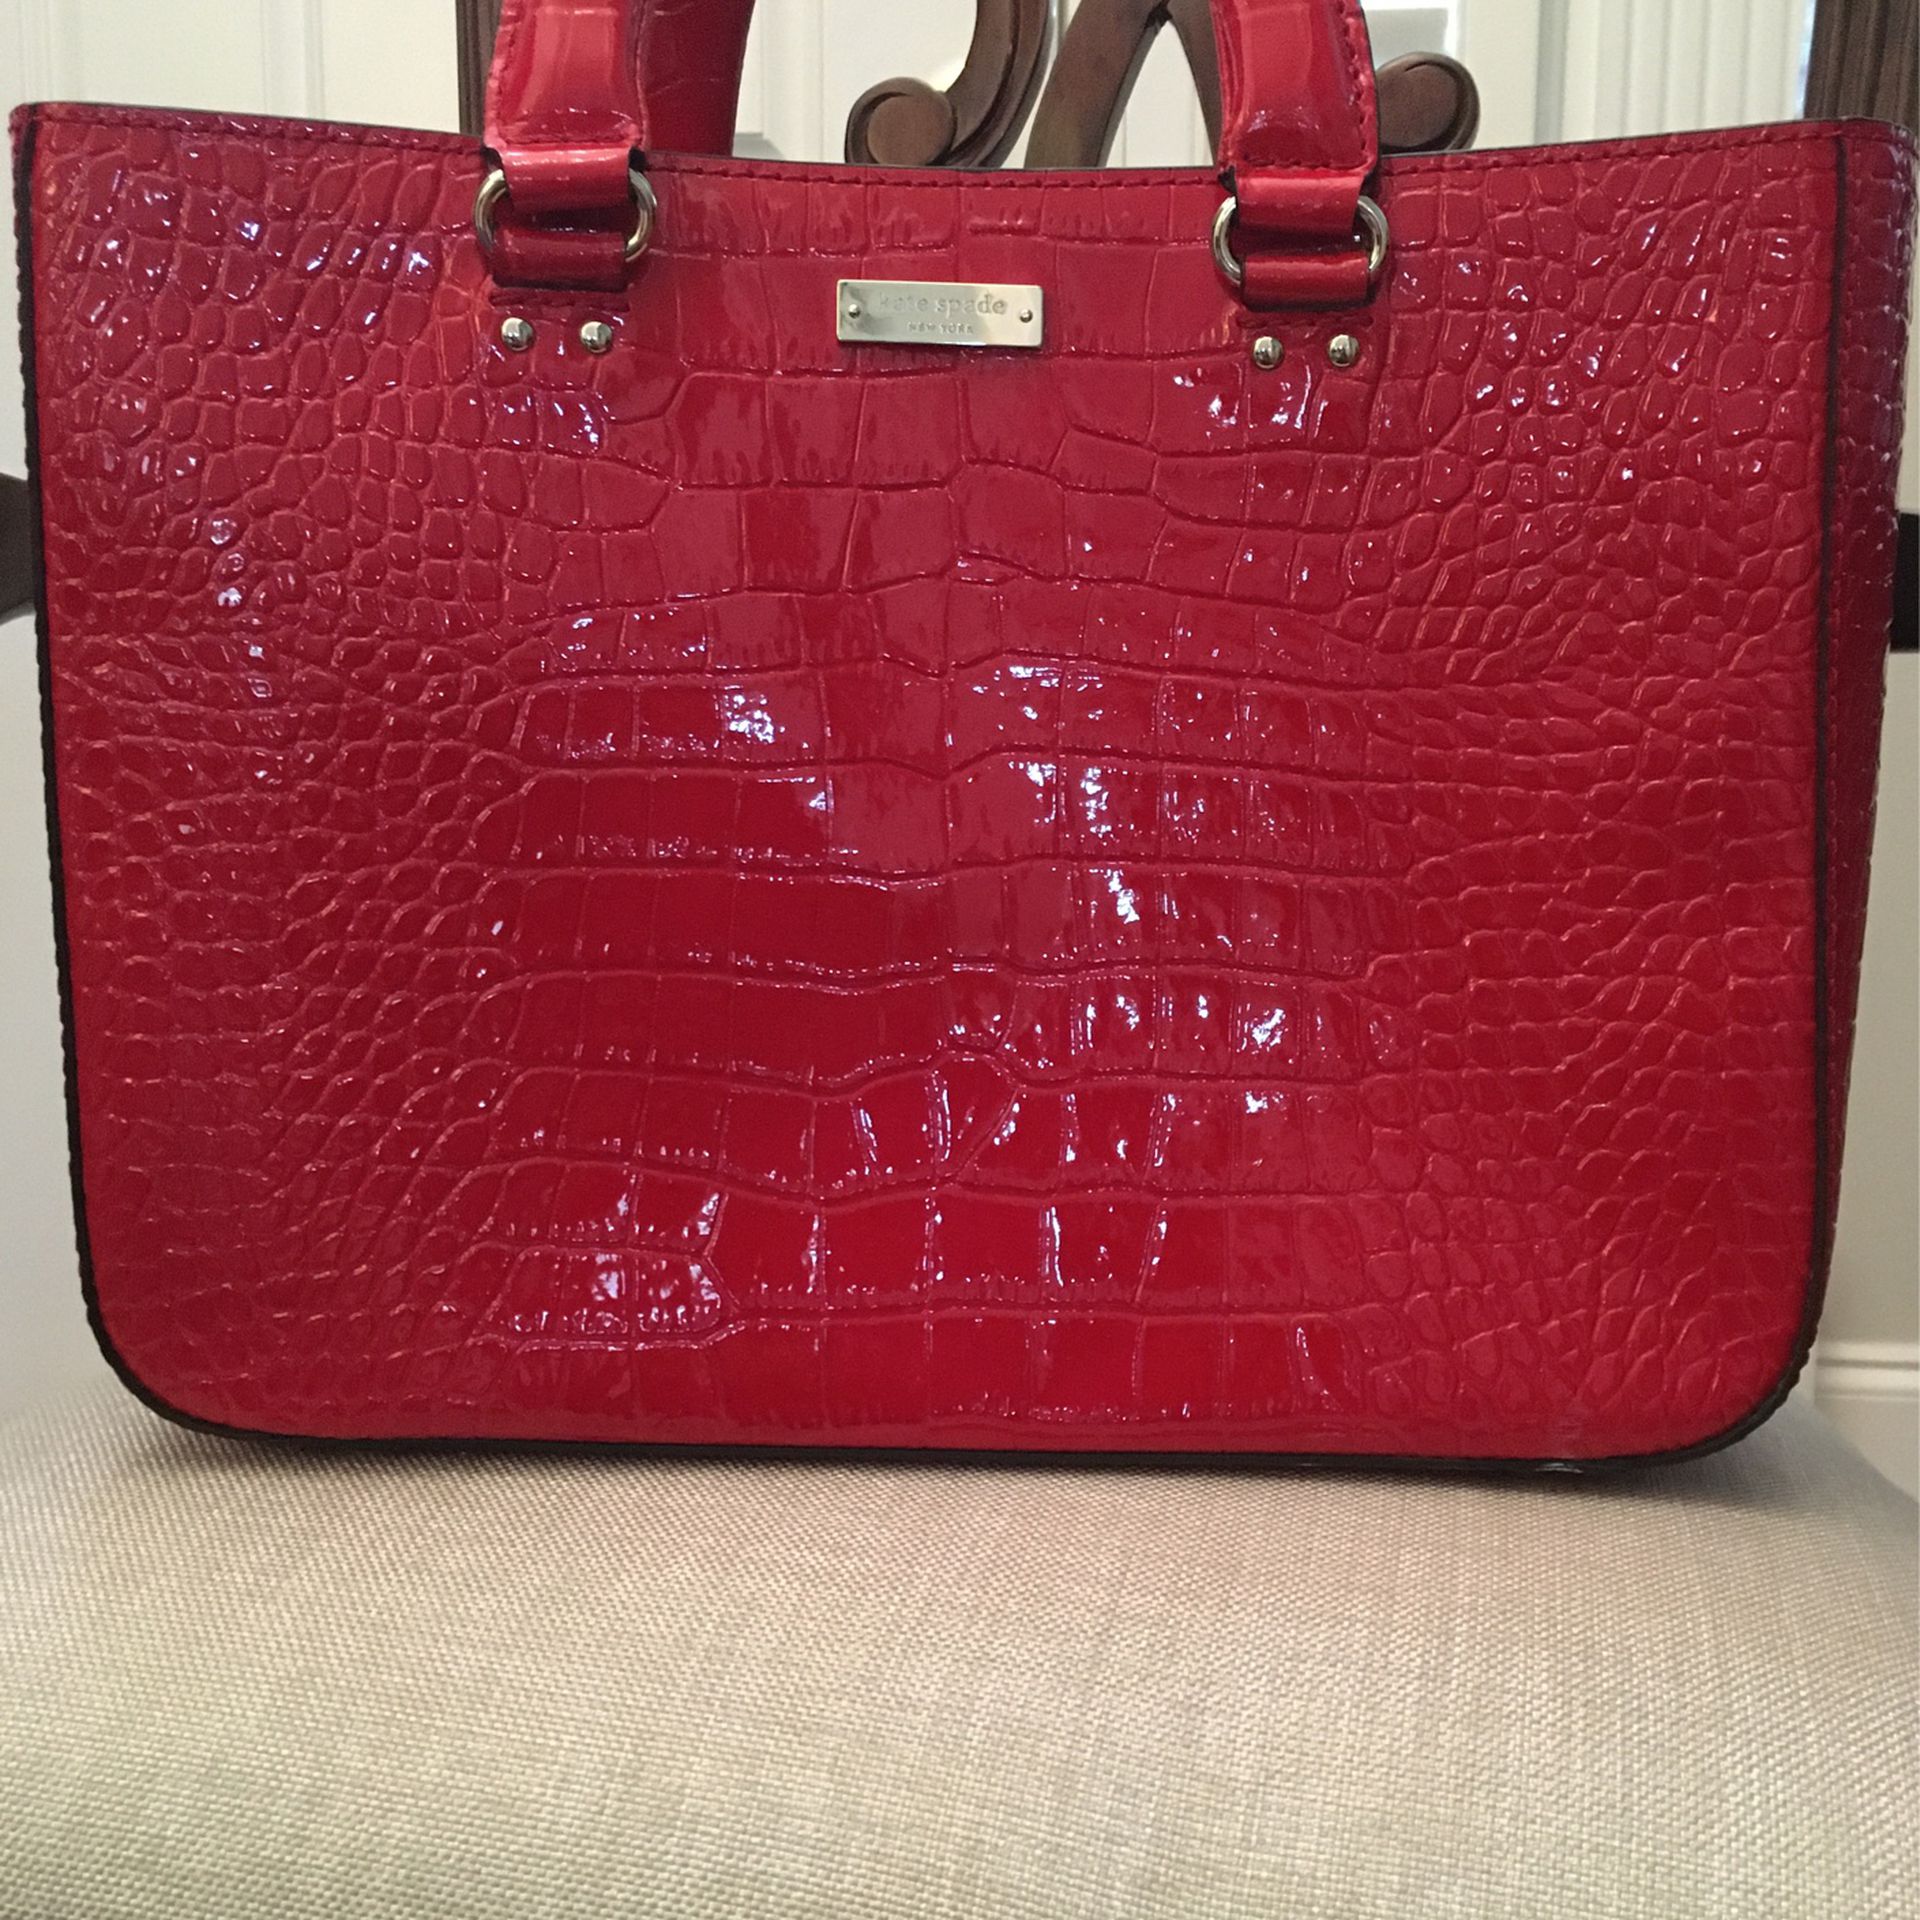 Kate Spade Patent Leather Handbag  With Dust Jacket 9 1/2 X 13 Inches Non Smoking Home Northeast Richland County Cash 